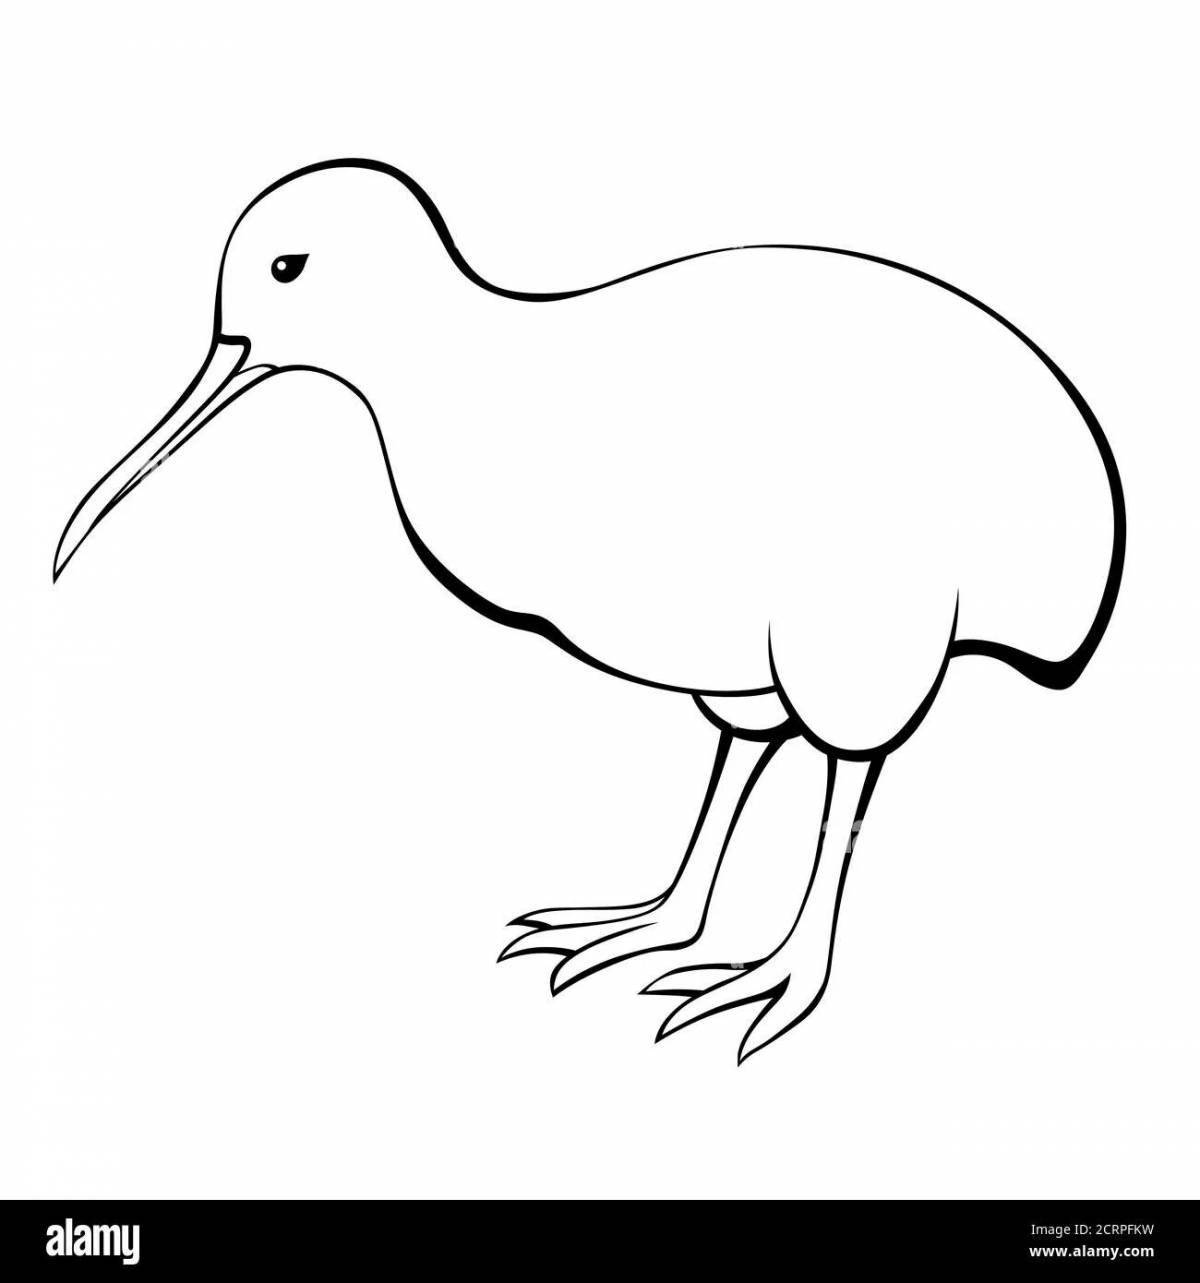 Color-frenzy kiwi bird coloring page